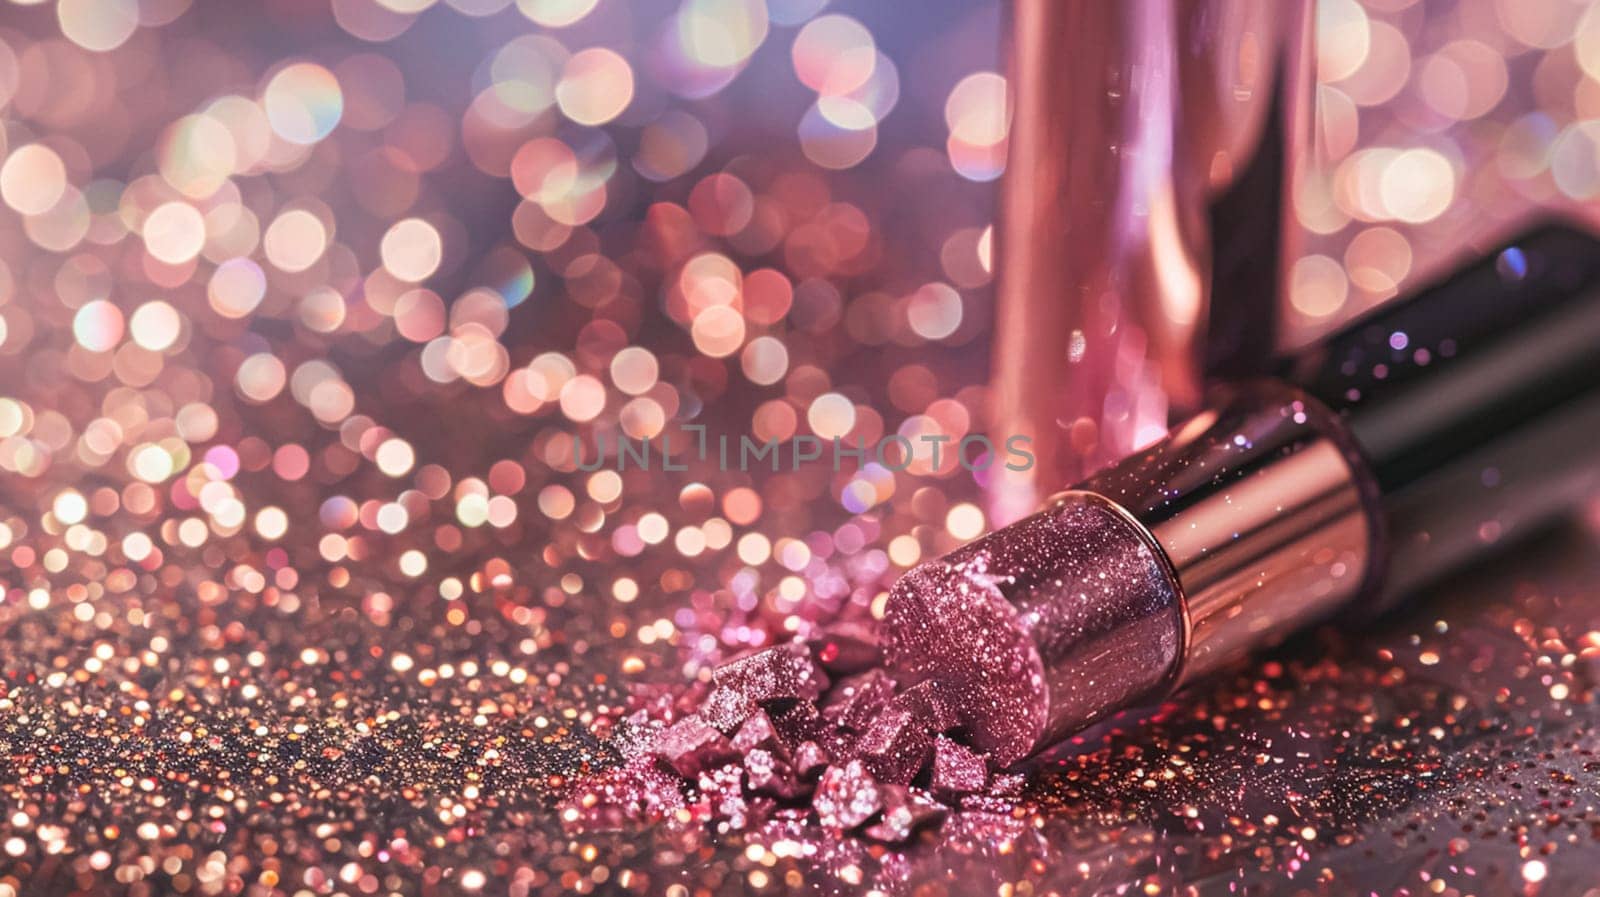 Beauty product and cosmetics texture, makeup shimmer glitter, blush eyeshadow powder as abstract luxury cosmetic background art